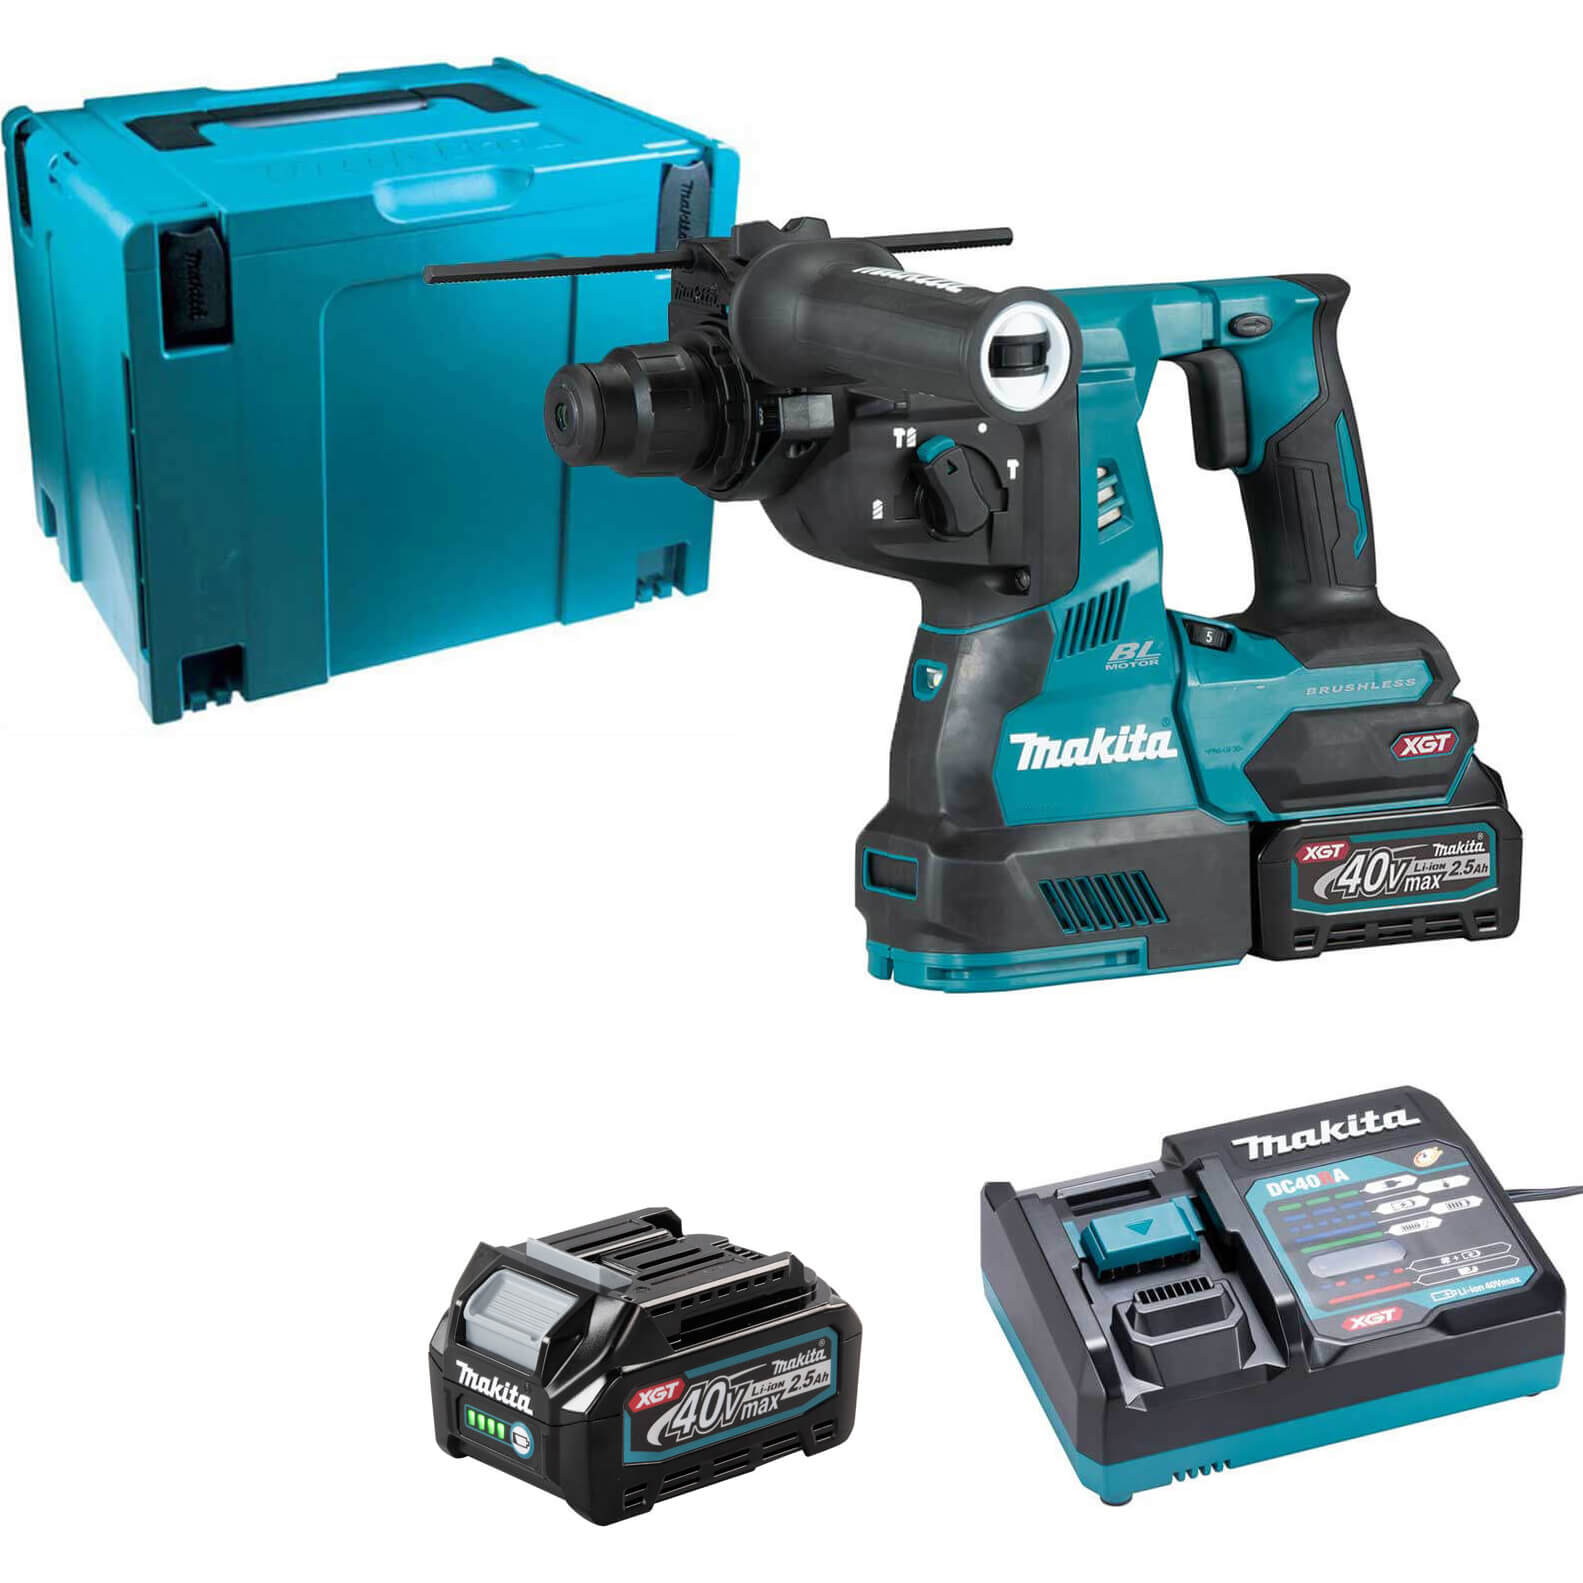 Image of Makita HR003G 40v Max XGT Cordless Brushless SDS Plus Drill 2 x 2.5ah Li-ion Charger Case